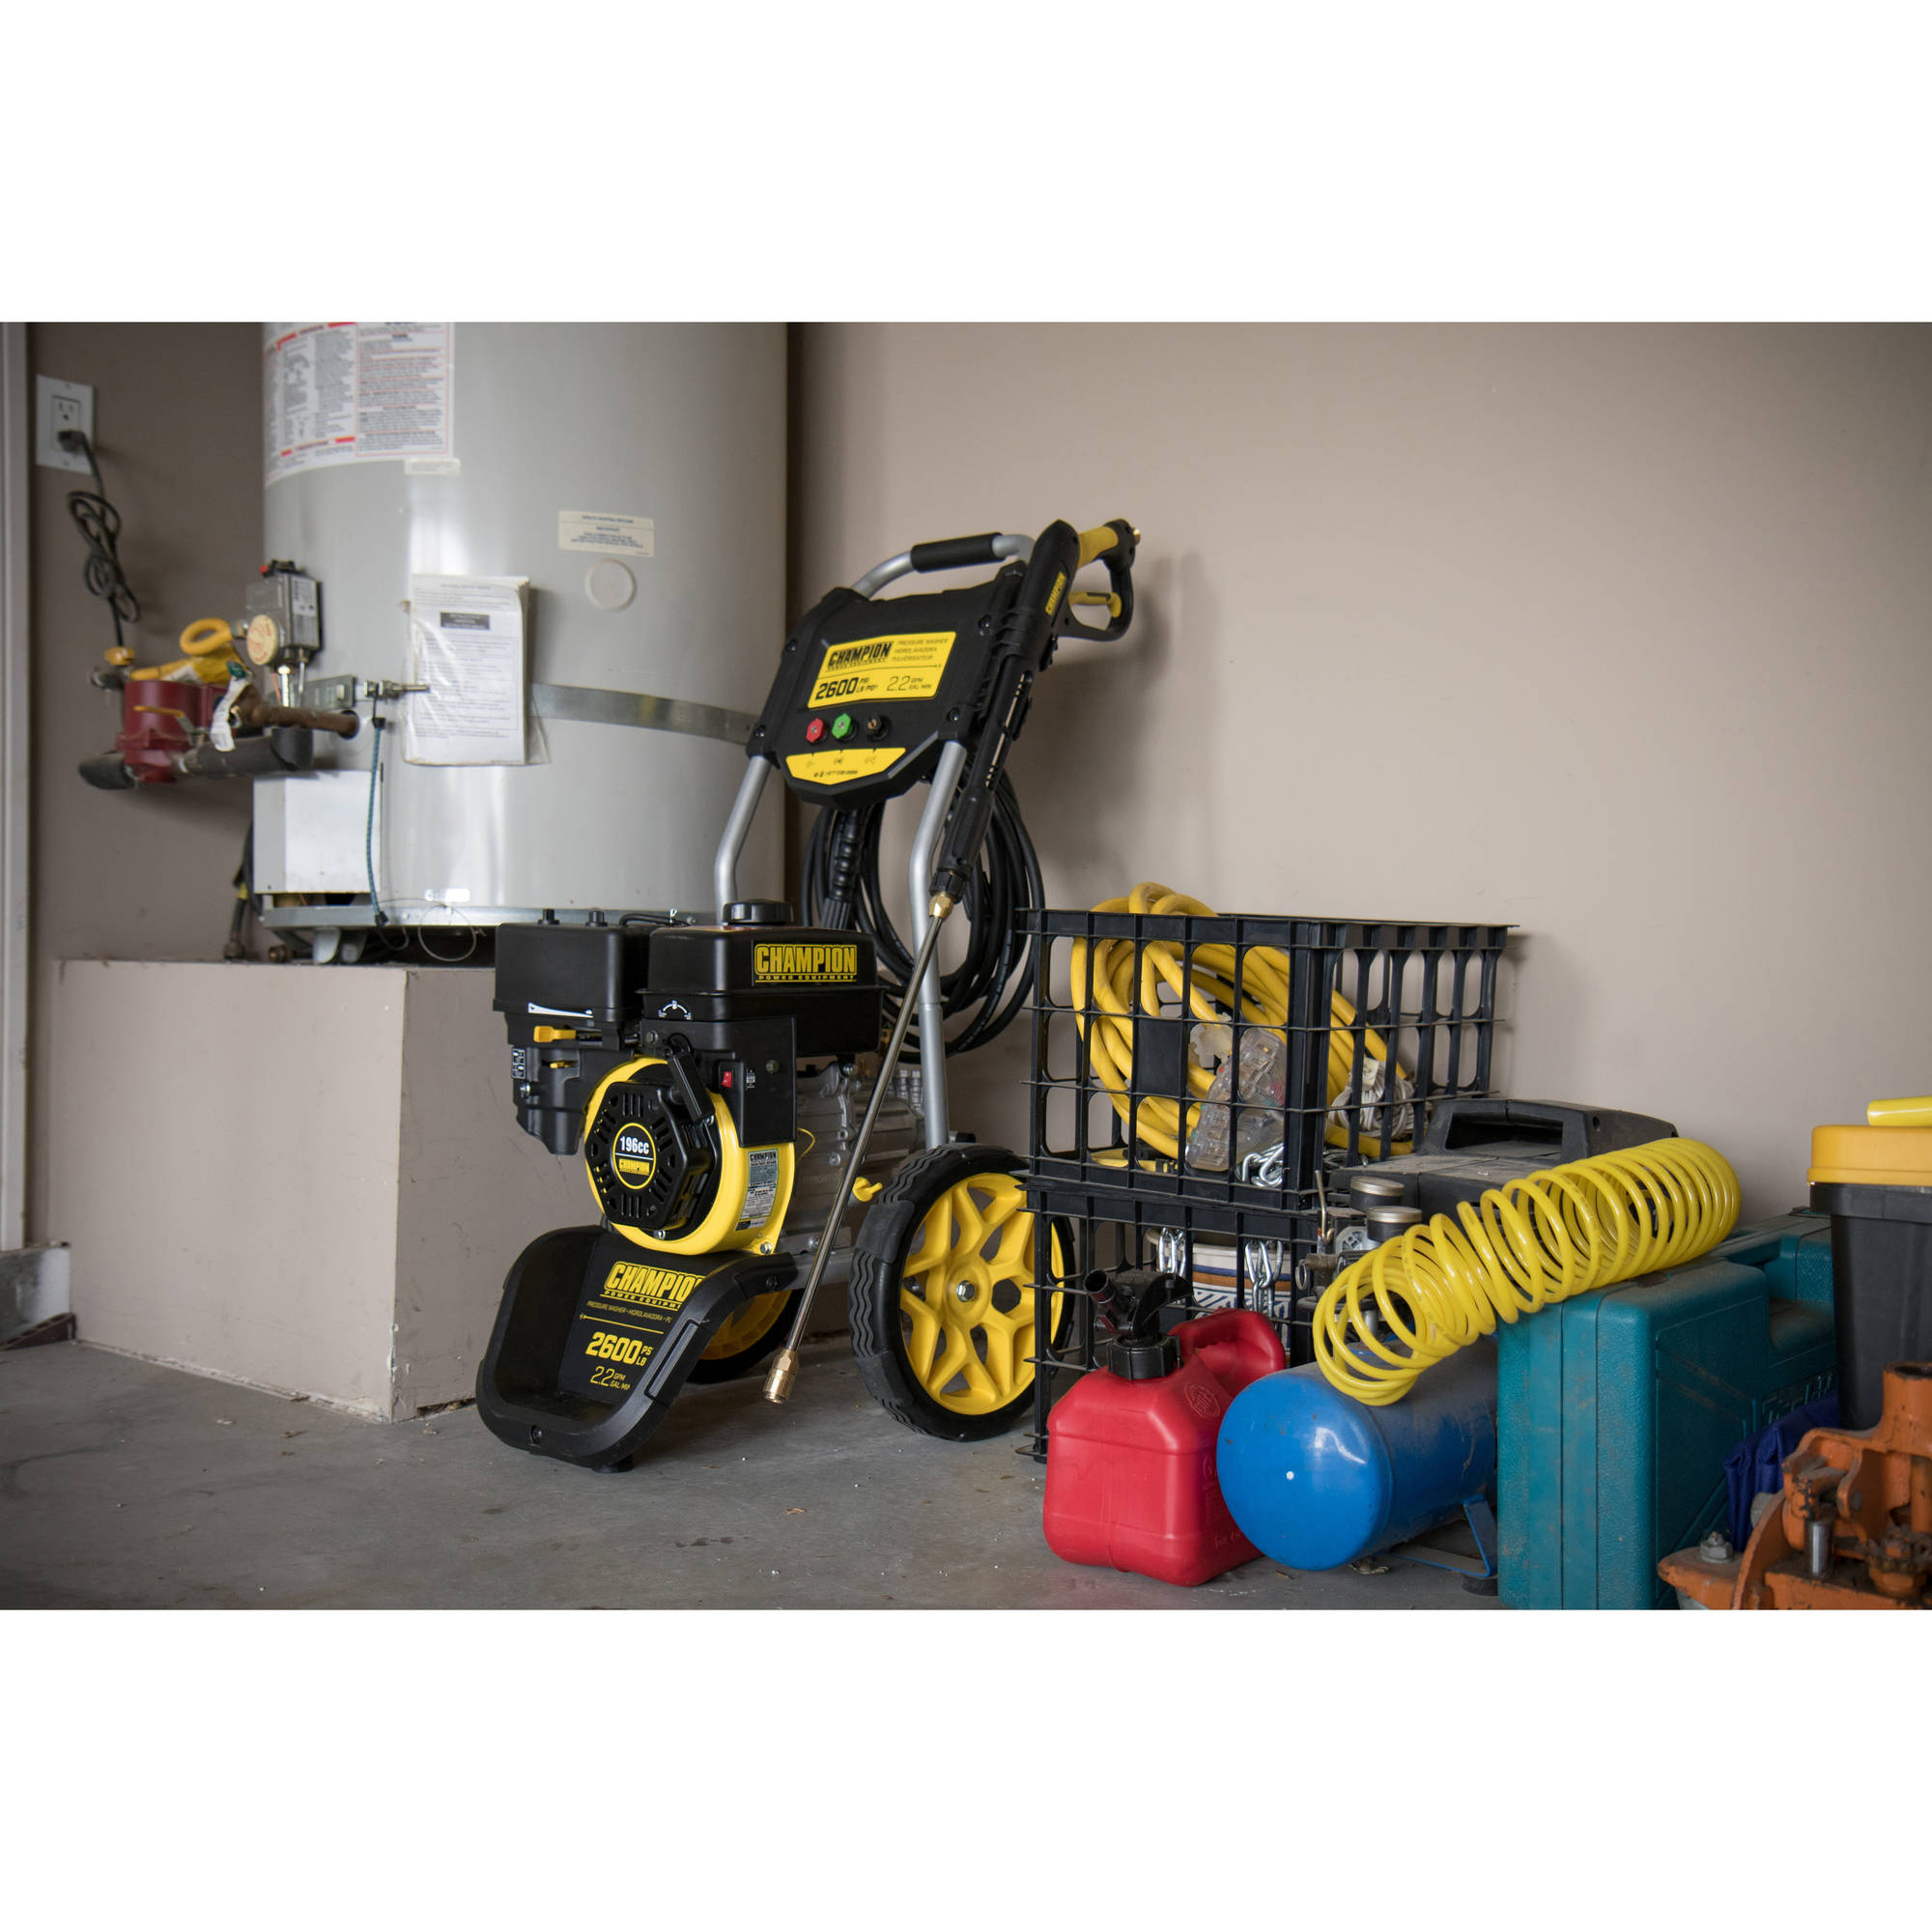 Champion 2600-PSI 2.2-GPM Dolly-Style Gas Pressure Washer - image 6 of 7